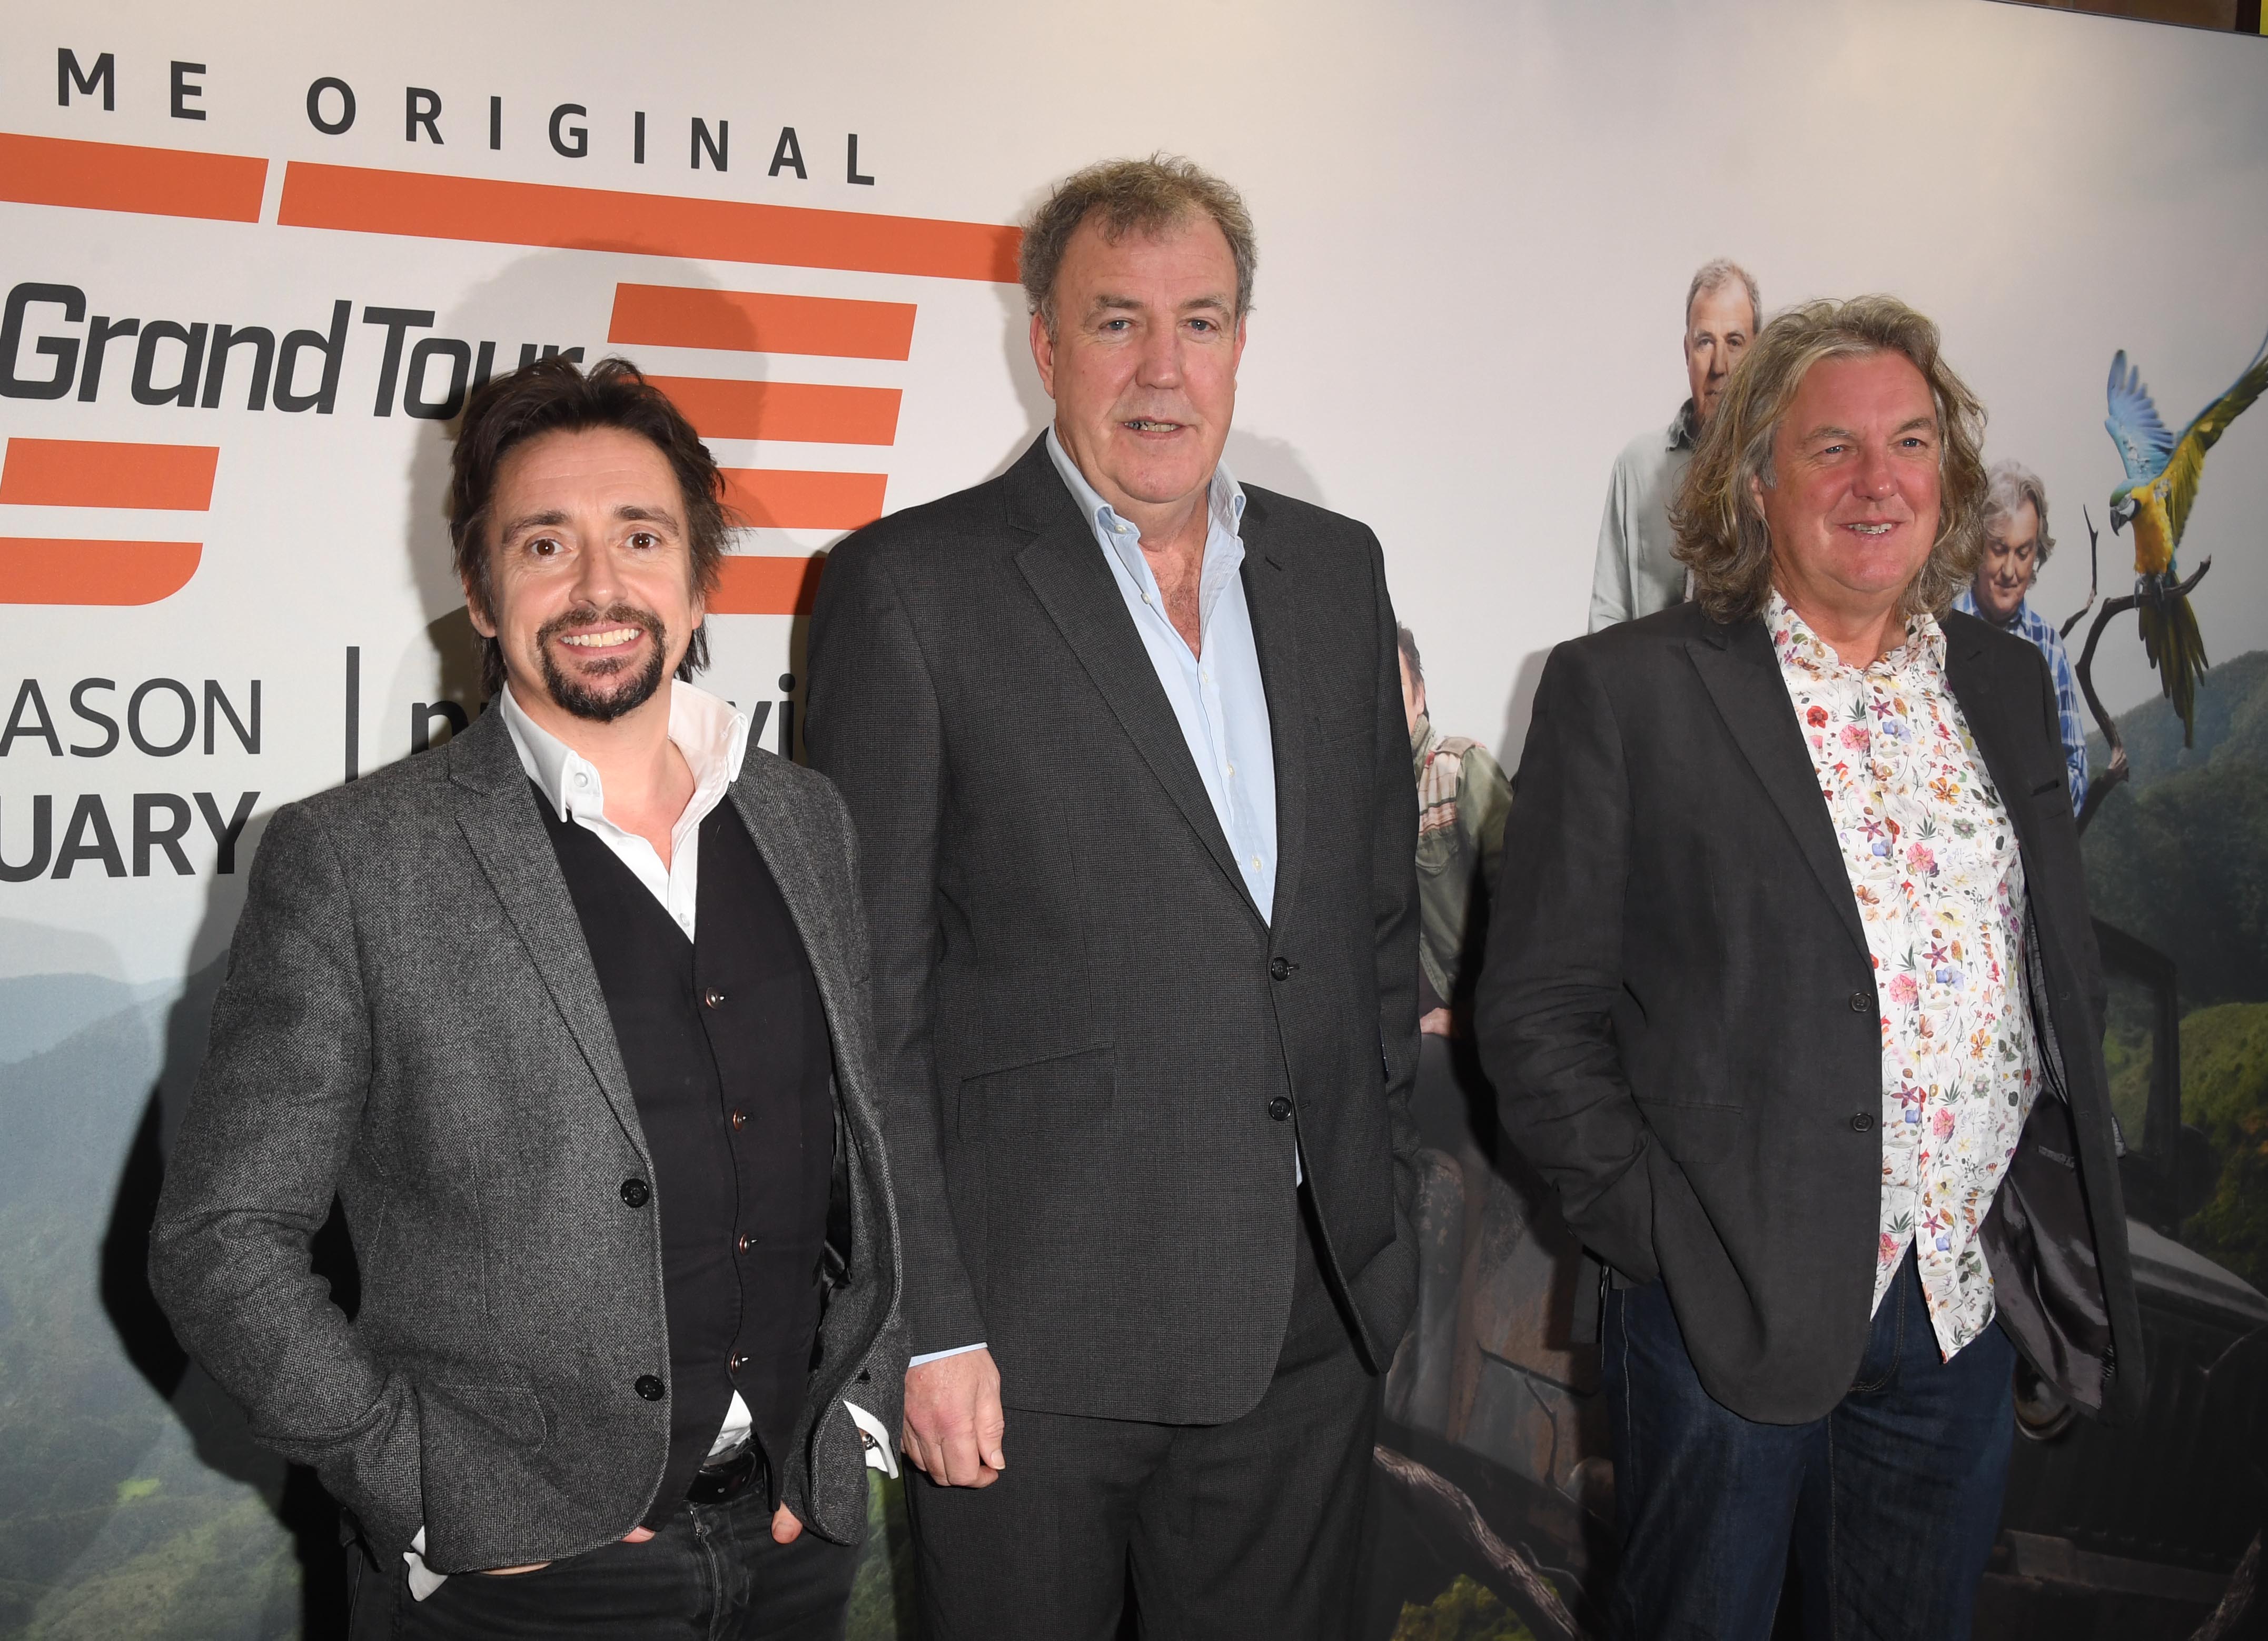 Clarkson (centre) hosted ‘Top Gear’ from 2002 to 2015 with Hammond (left) and May (right)